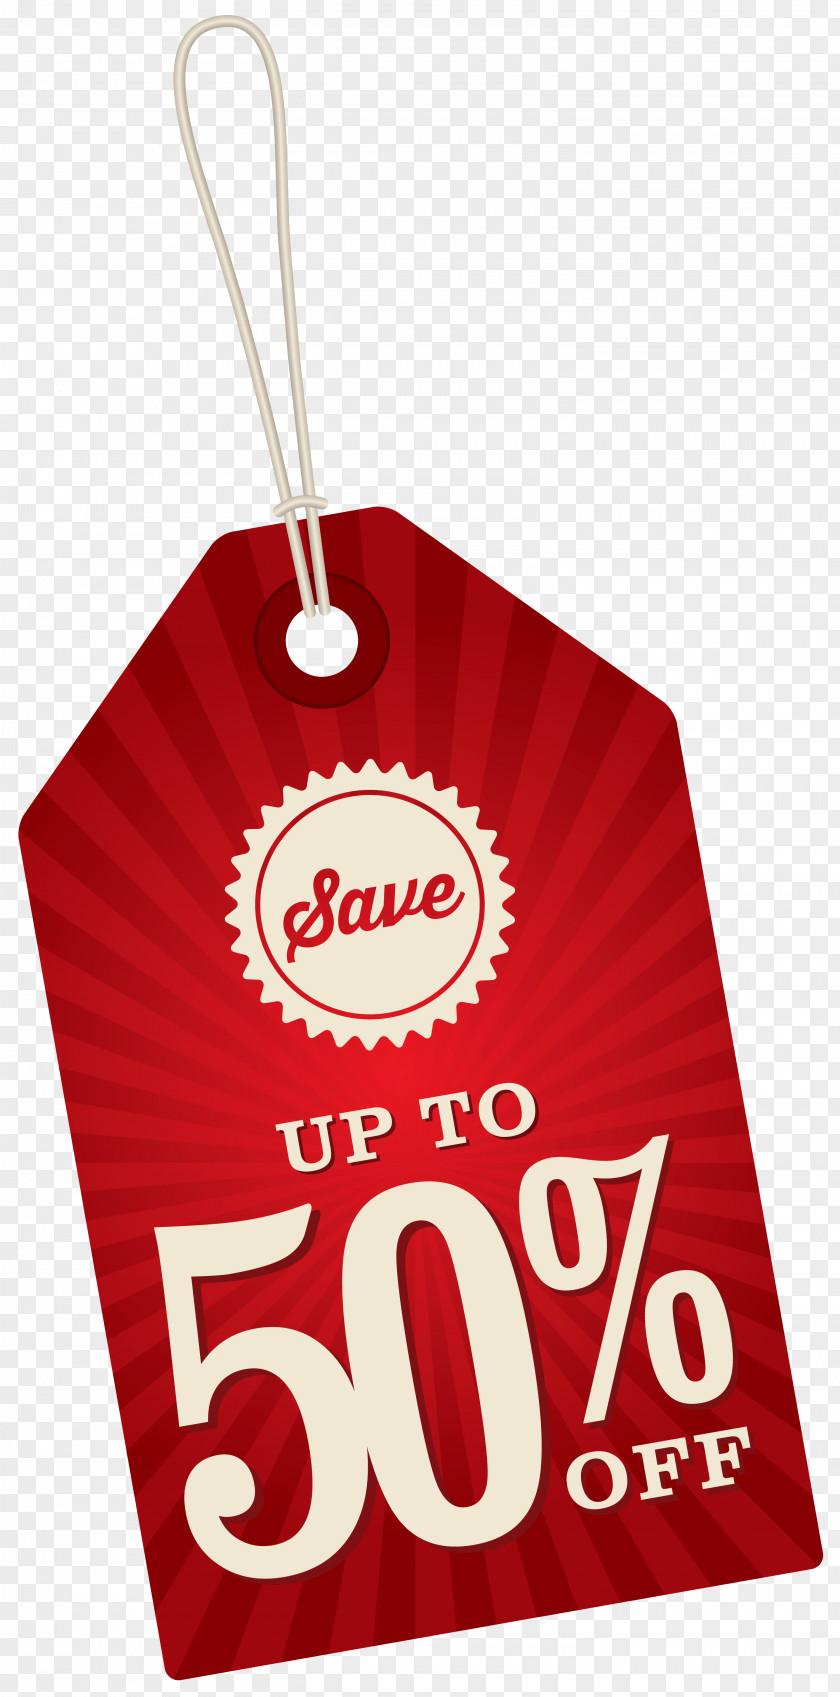 Save Up To 50% Off Label Clipart Image Sales Clip Art PNG